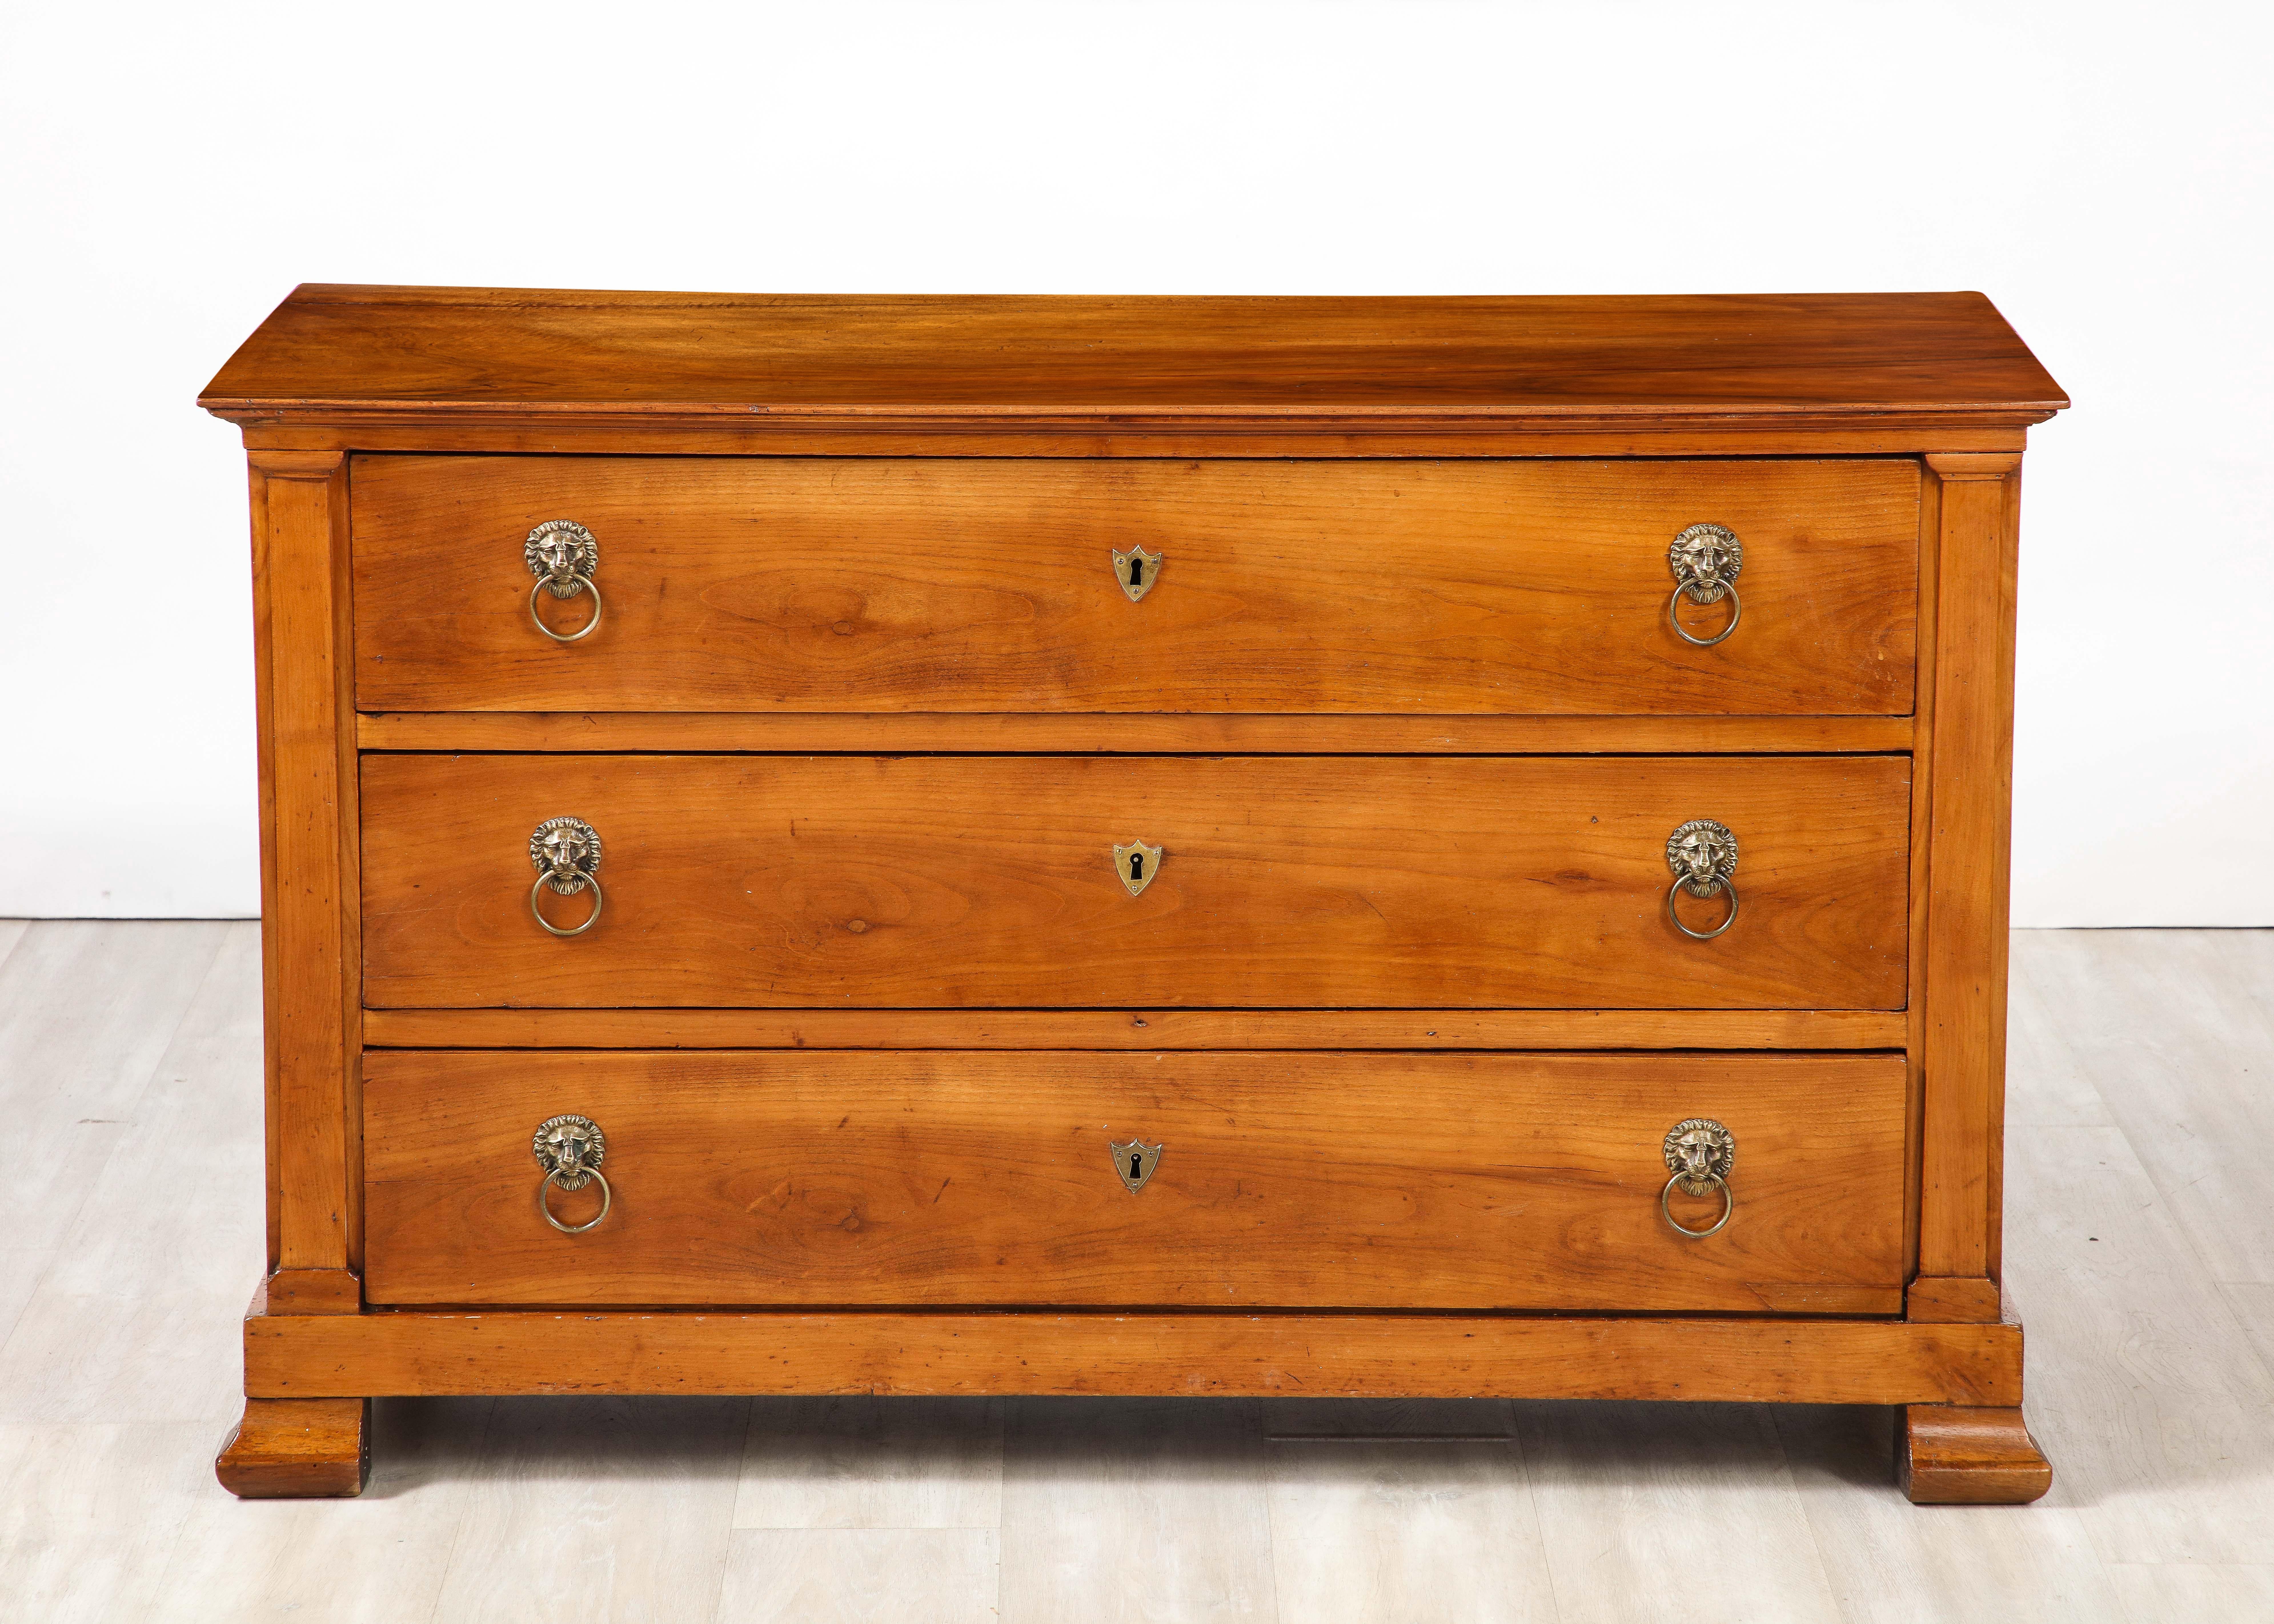 A very fine and handsome French late Neoclassical /early Directoire walnut three drawer commode with elegant brass lion head ring drawer pulls, the whole supported on plinth block feet.  The walnut is rich in color and beautifully contrasts with the